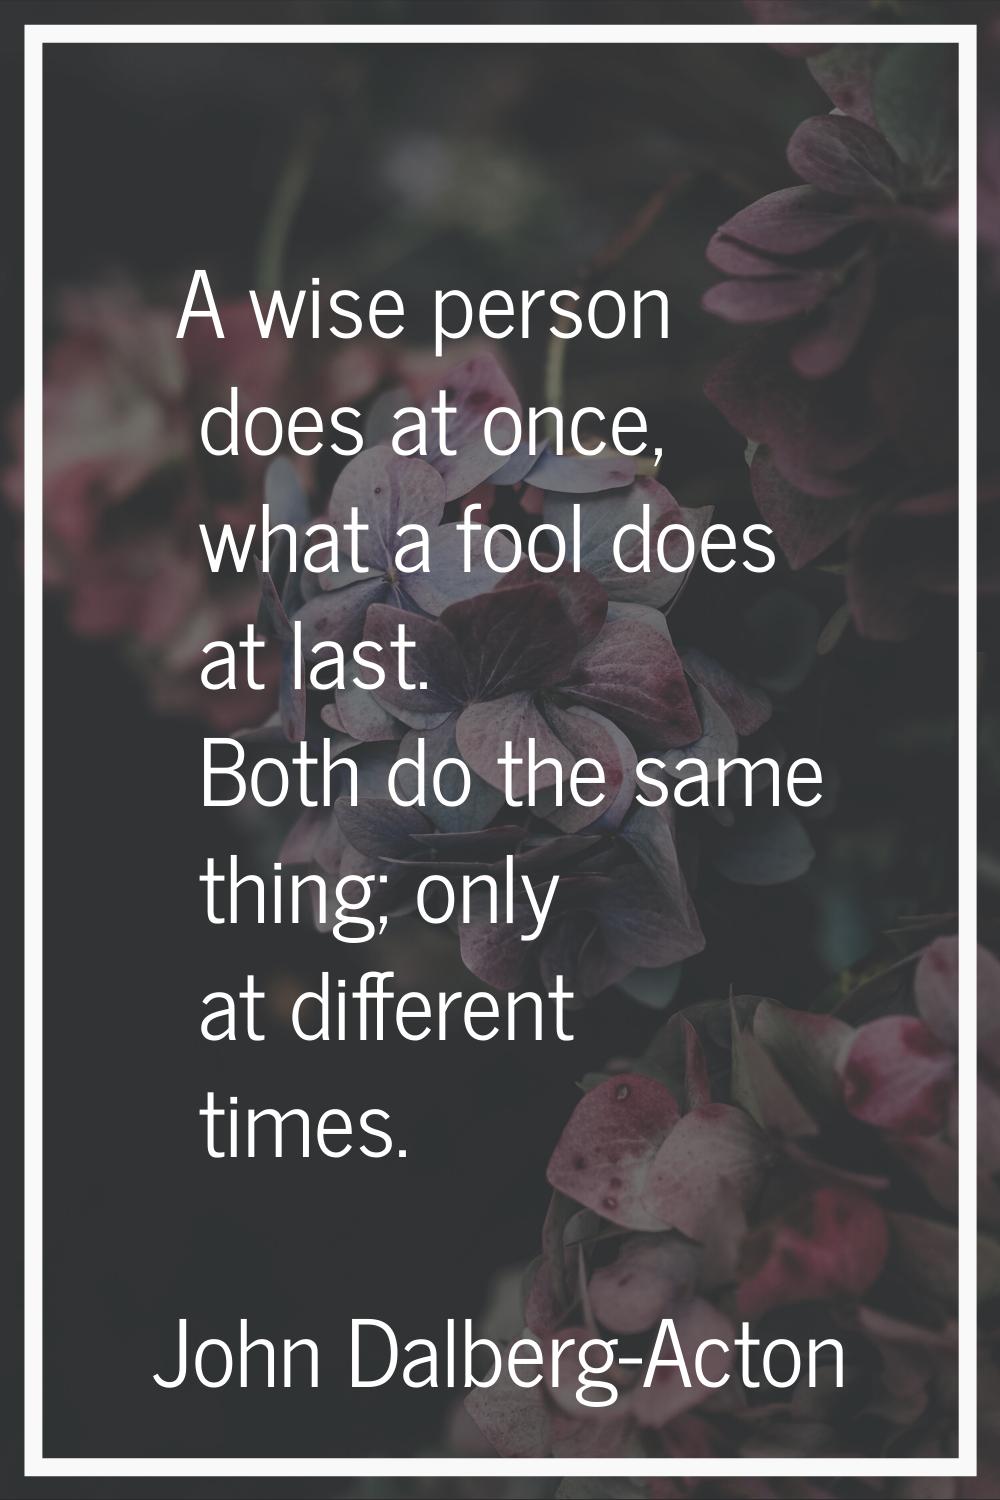 A wise person does at once, what a fool does at last. Both do the same thing; only at different tim